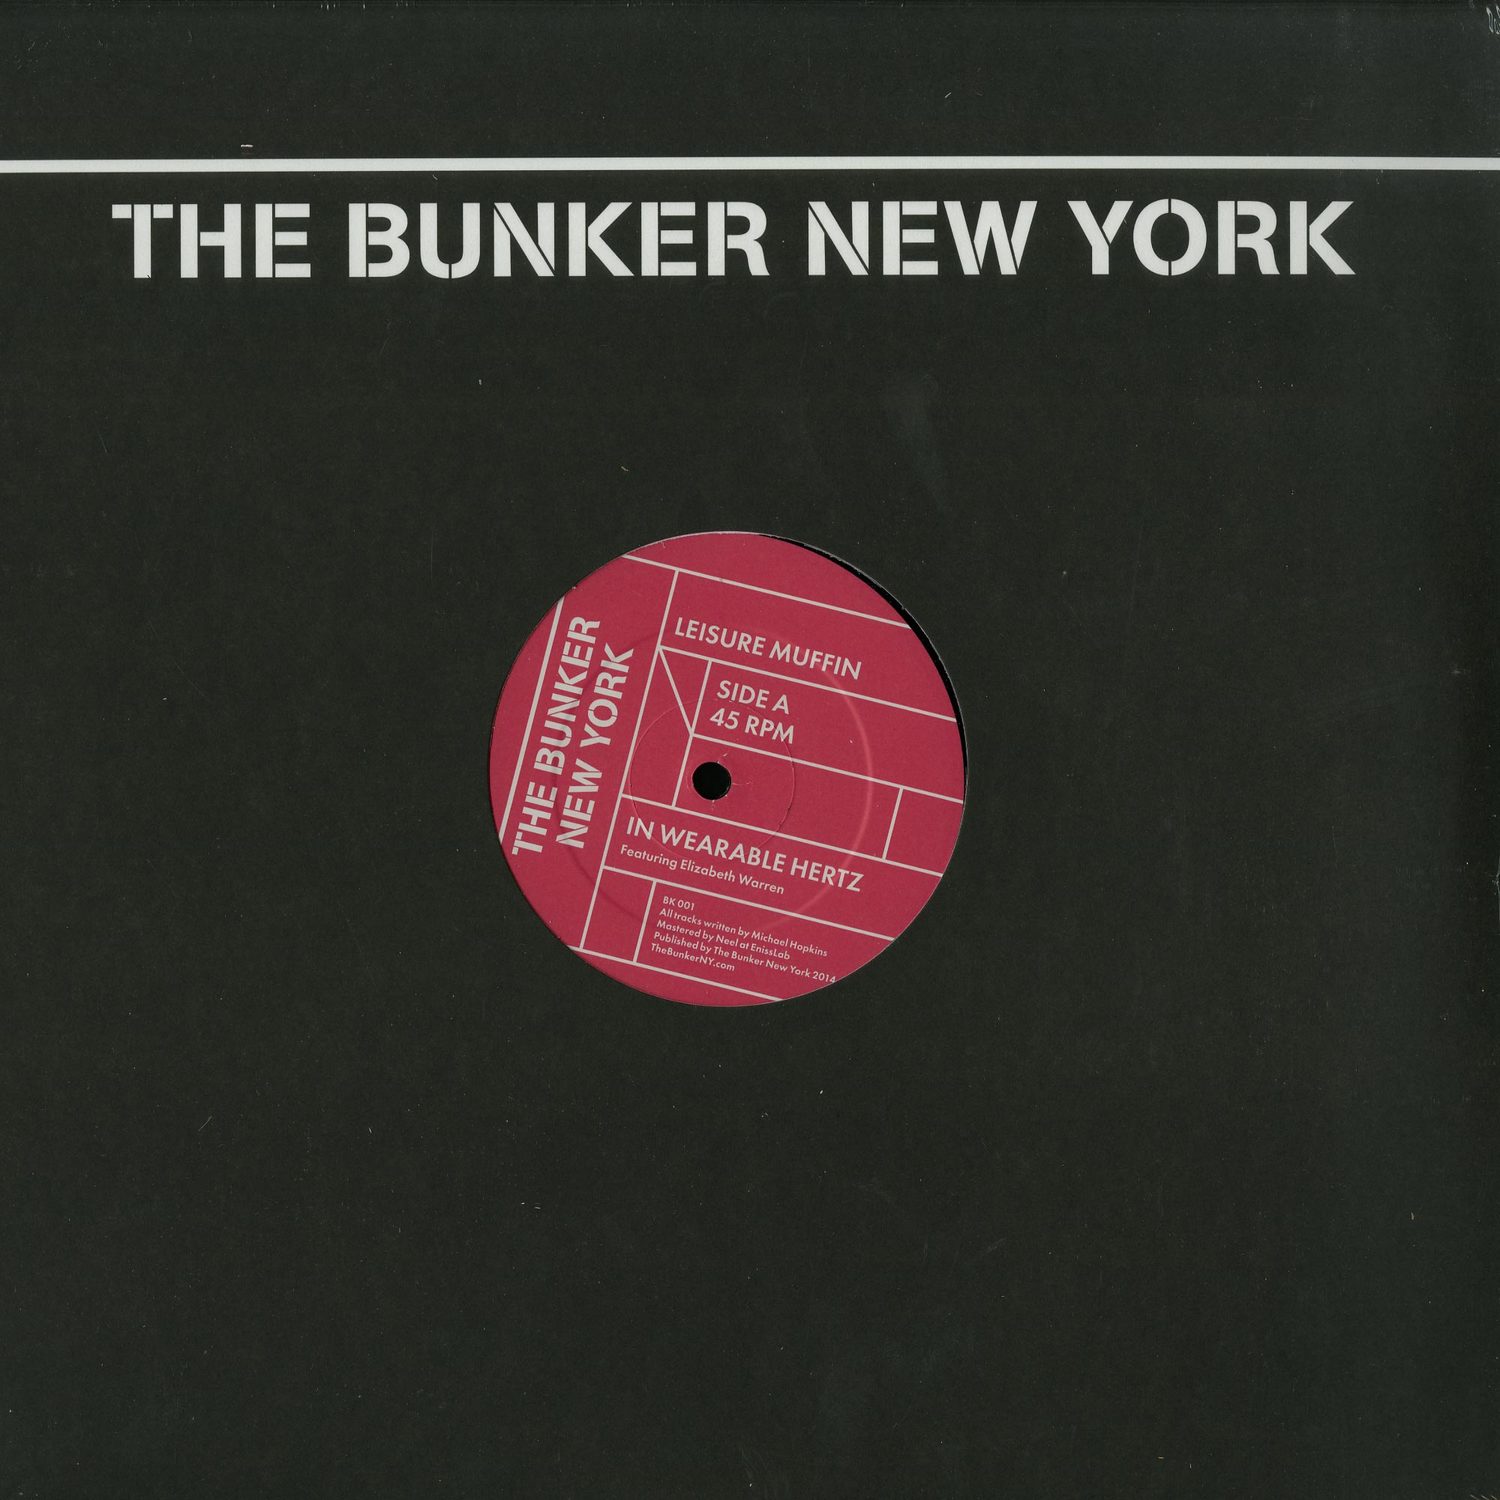 Leisure Muffin - THE BUNKER NEW YORK 001